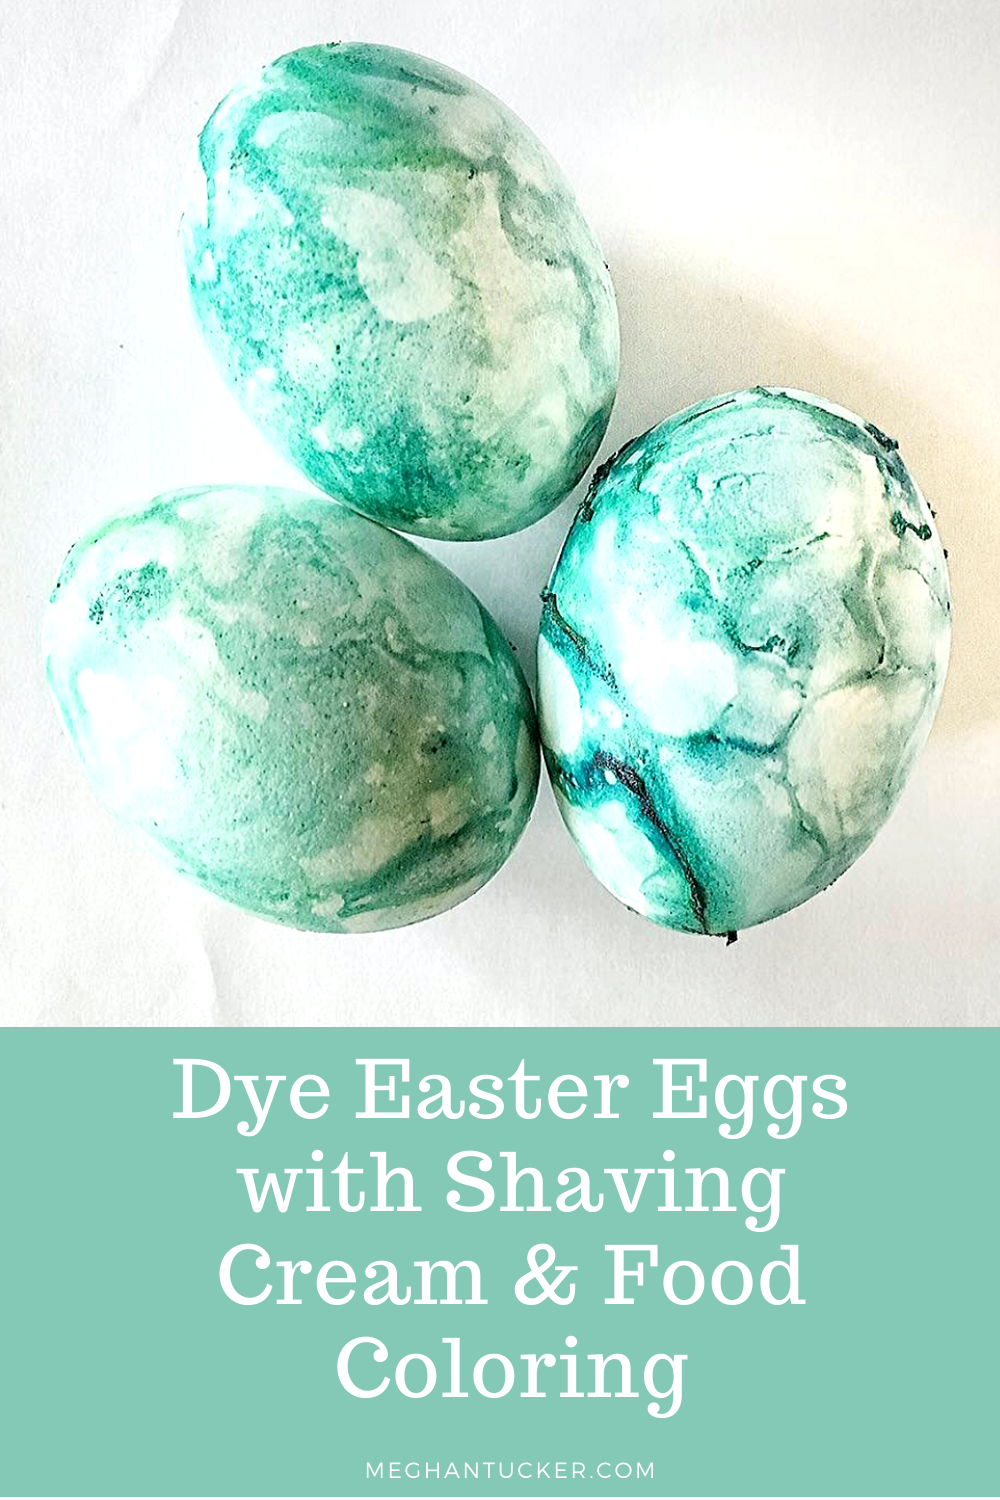 Dye Easter Eggs with Shaving Cream & Food Coloring